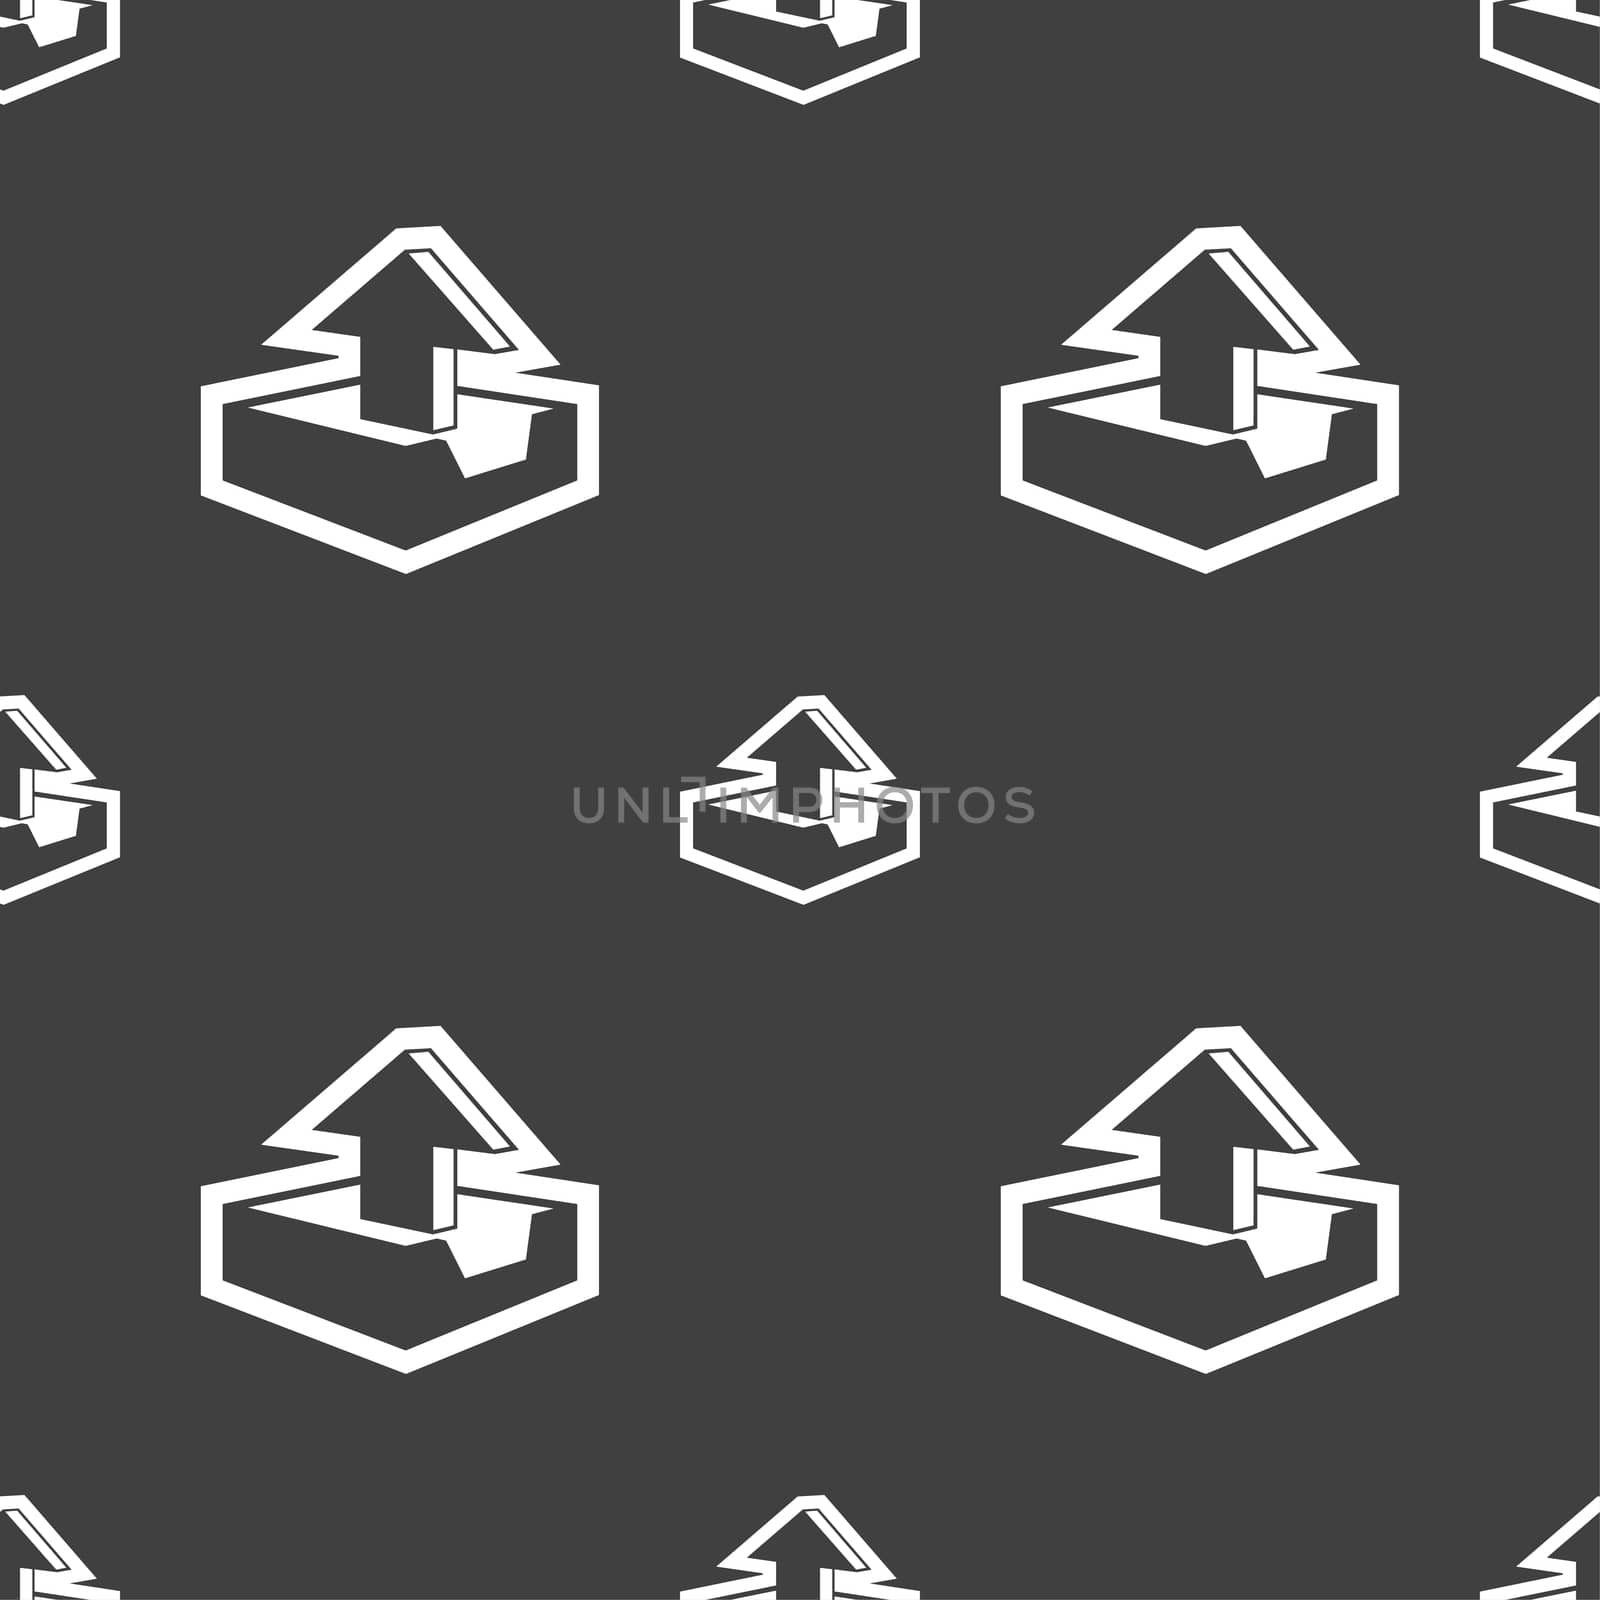 Upload icon sign. Seamless pattern on a gray background. illustration